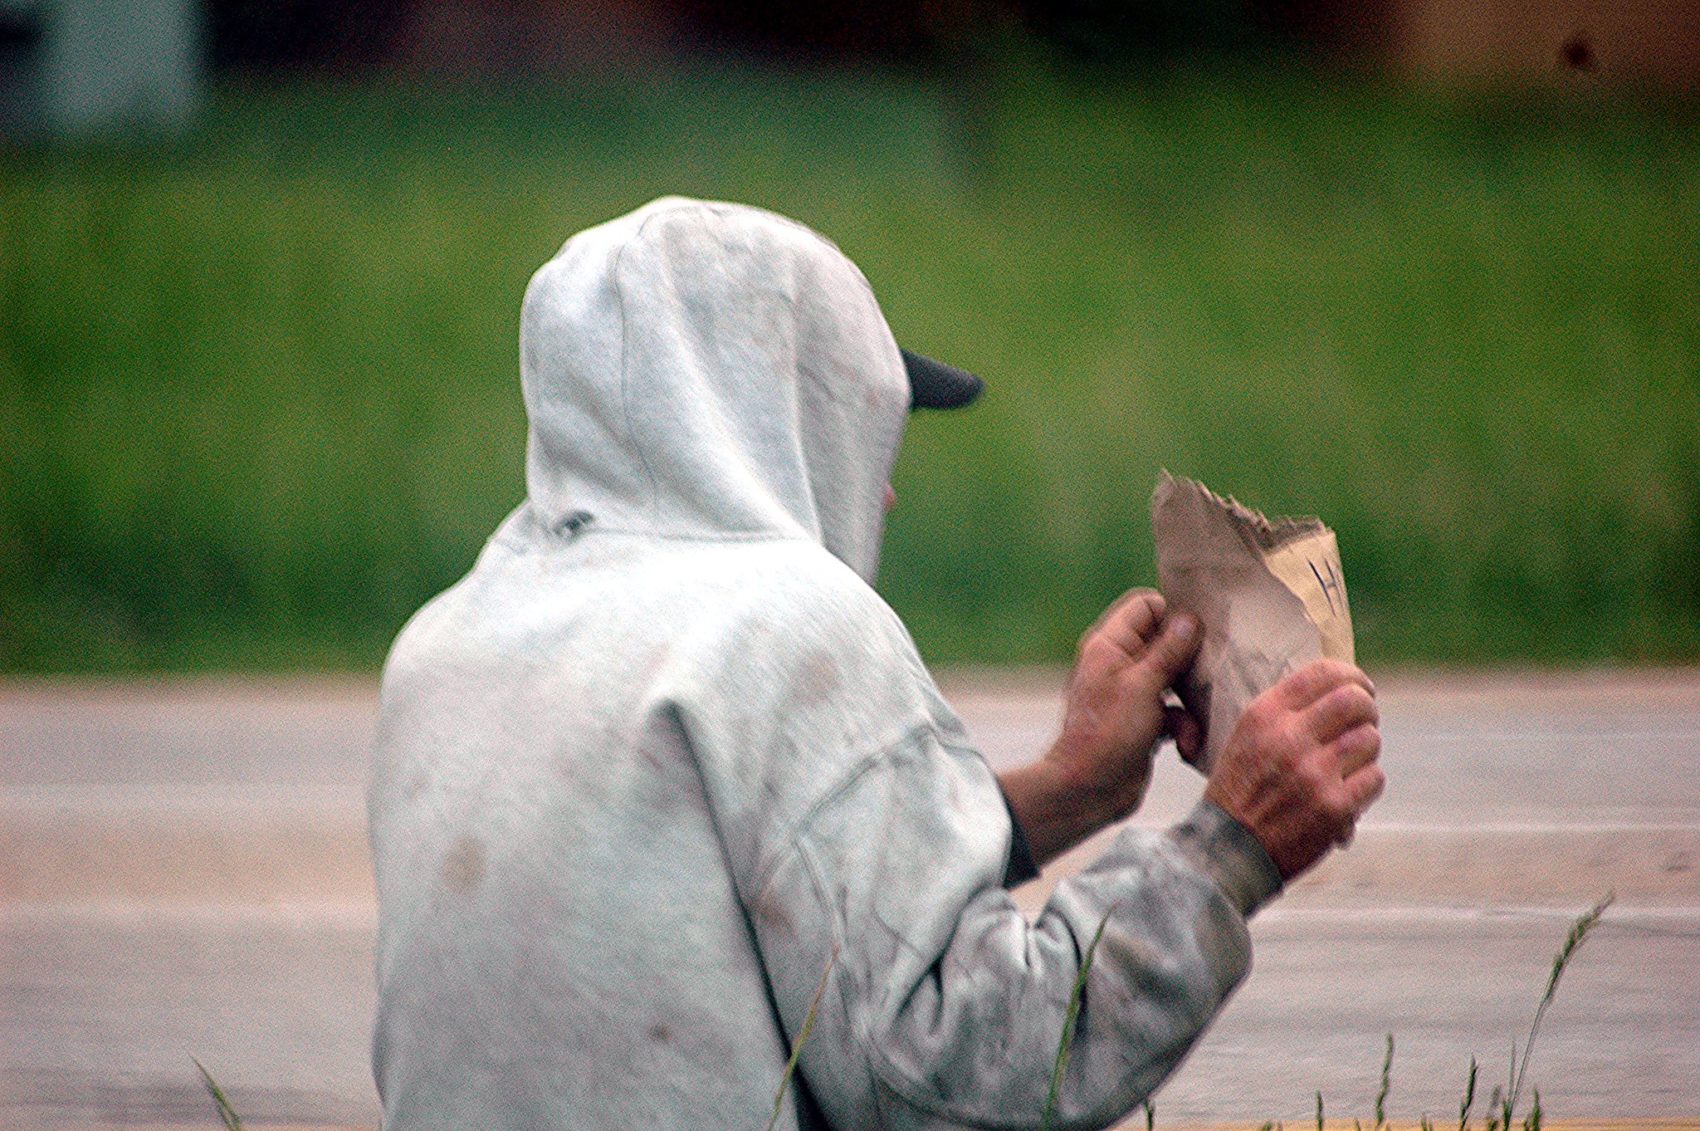 Picture of homeless person near roadway